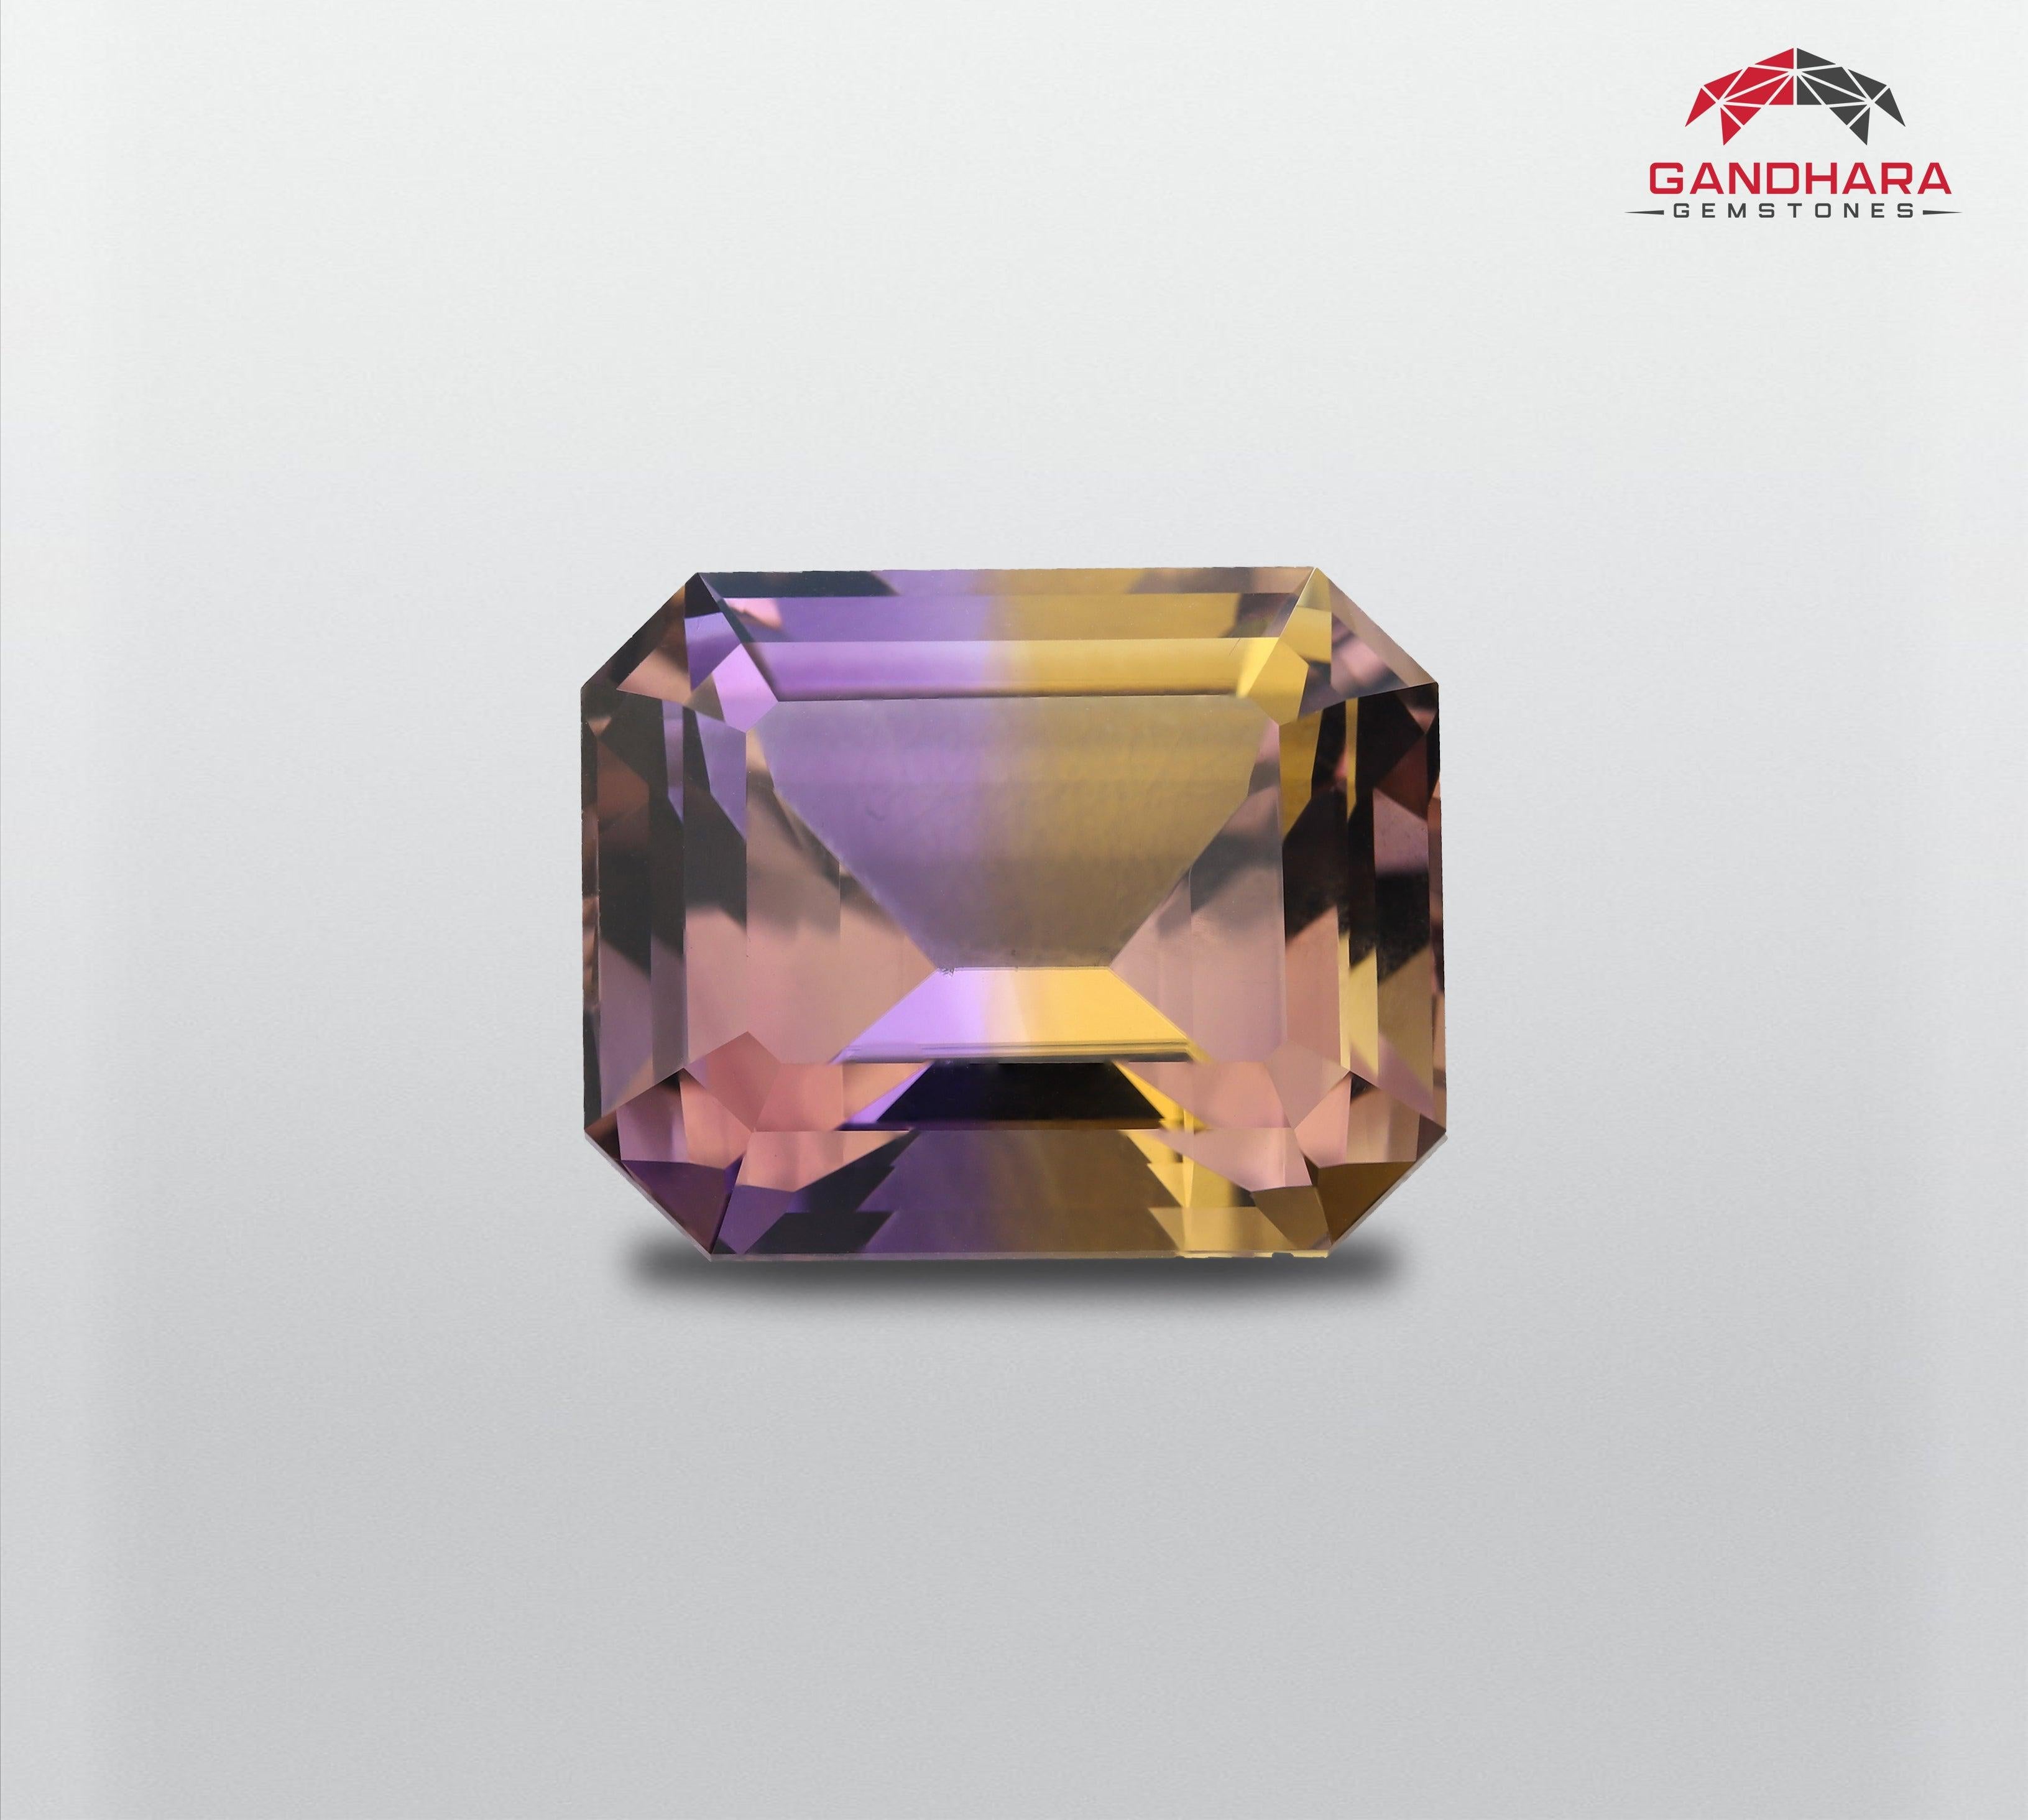 Natural Pretty Ametrine Gemstone, Available For Sale At Wholesale Price, Natural High-Quality, Loupe Clean, Emerald-Cut, Loose Certified Ametrine Gemstone From Bolivia.

Product Information :
Weight: 13.72 carats
Dimensions: 15.7 x 12.7 x 9.9